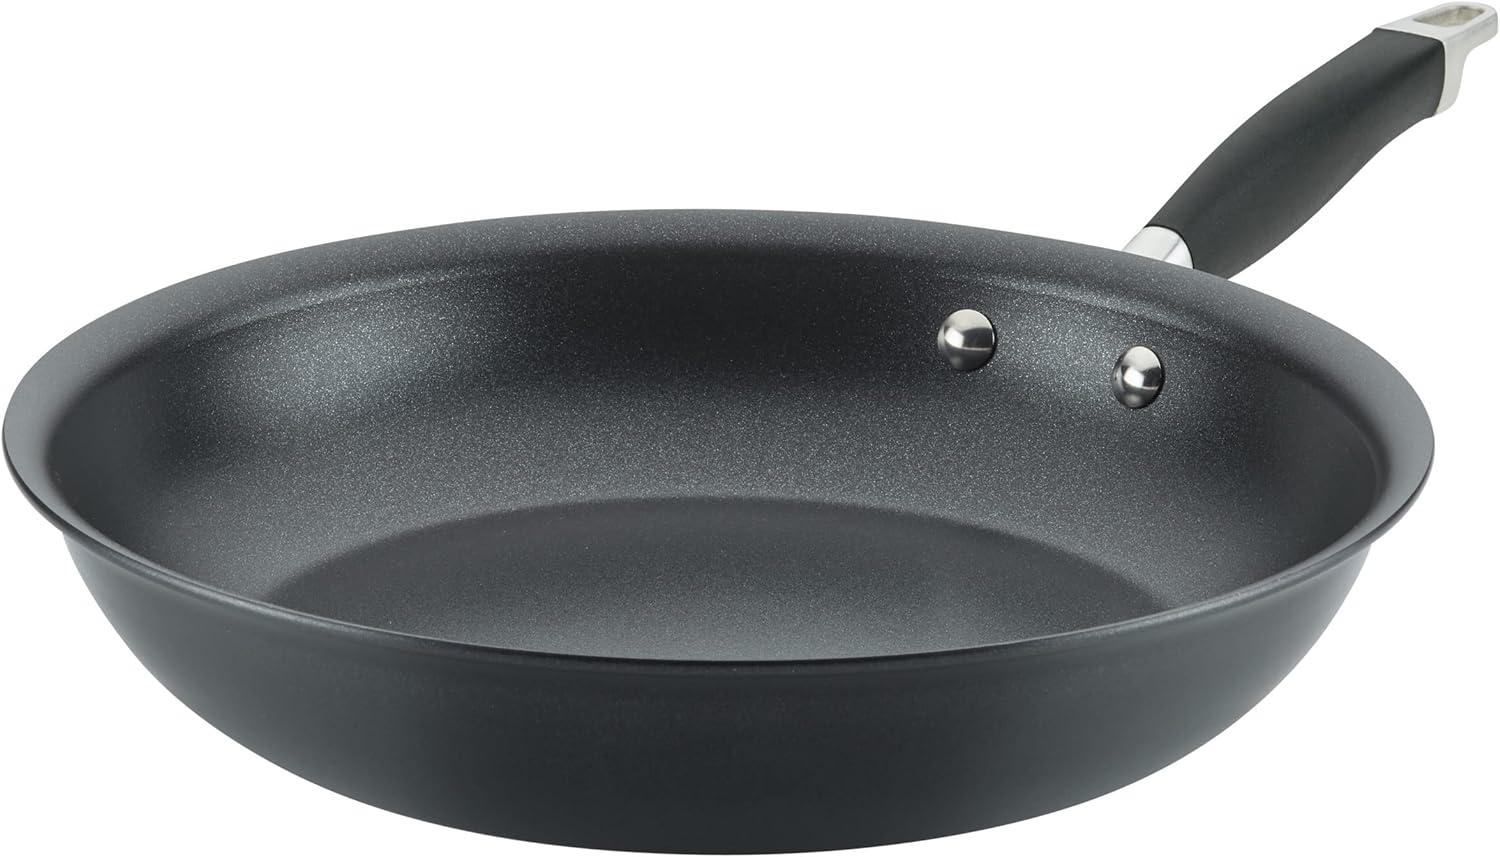 Anolon Advanced Home Hard Anodized Nonstick Frying Pan\/Skillet, 12.75 Inch, Moonstone